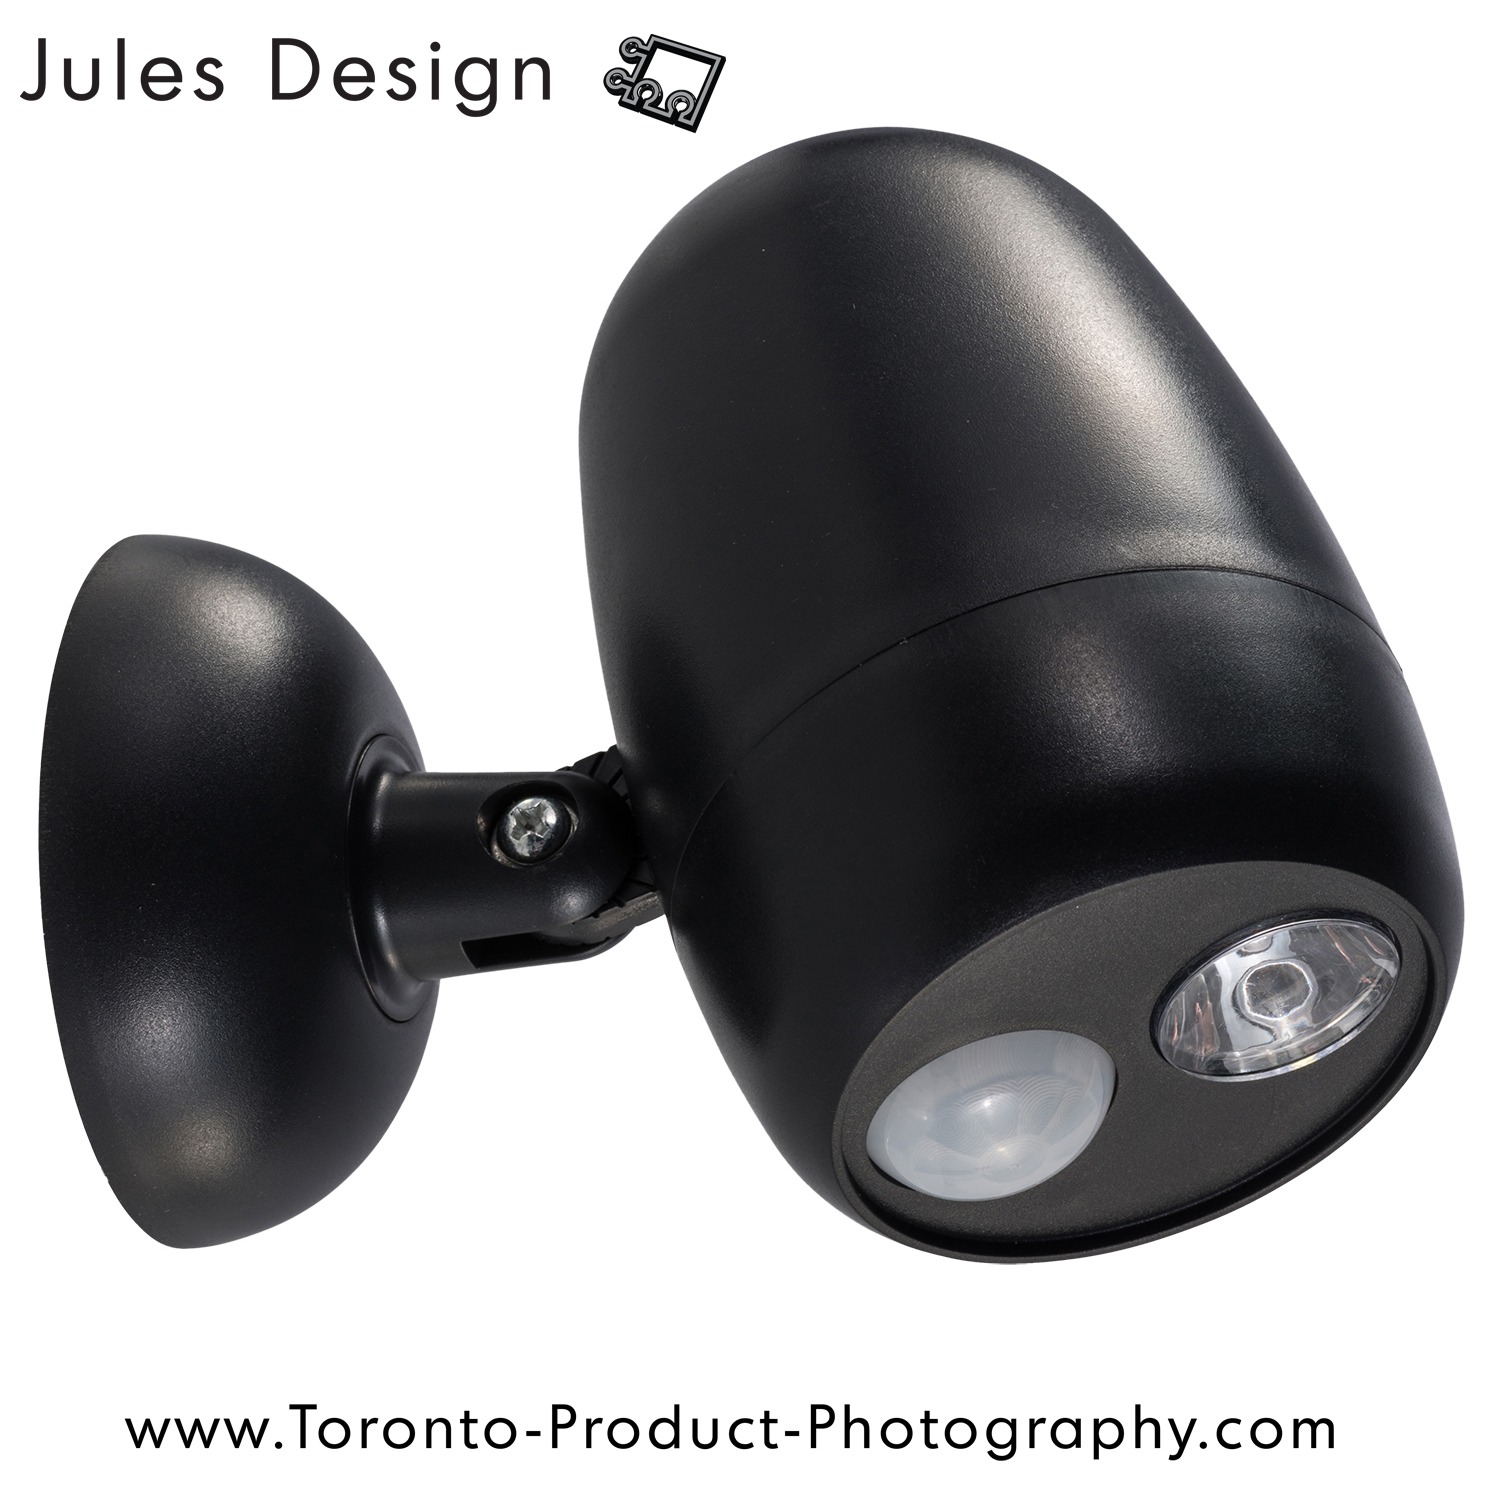 Mississauga Commercial Product Photographer